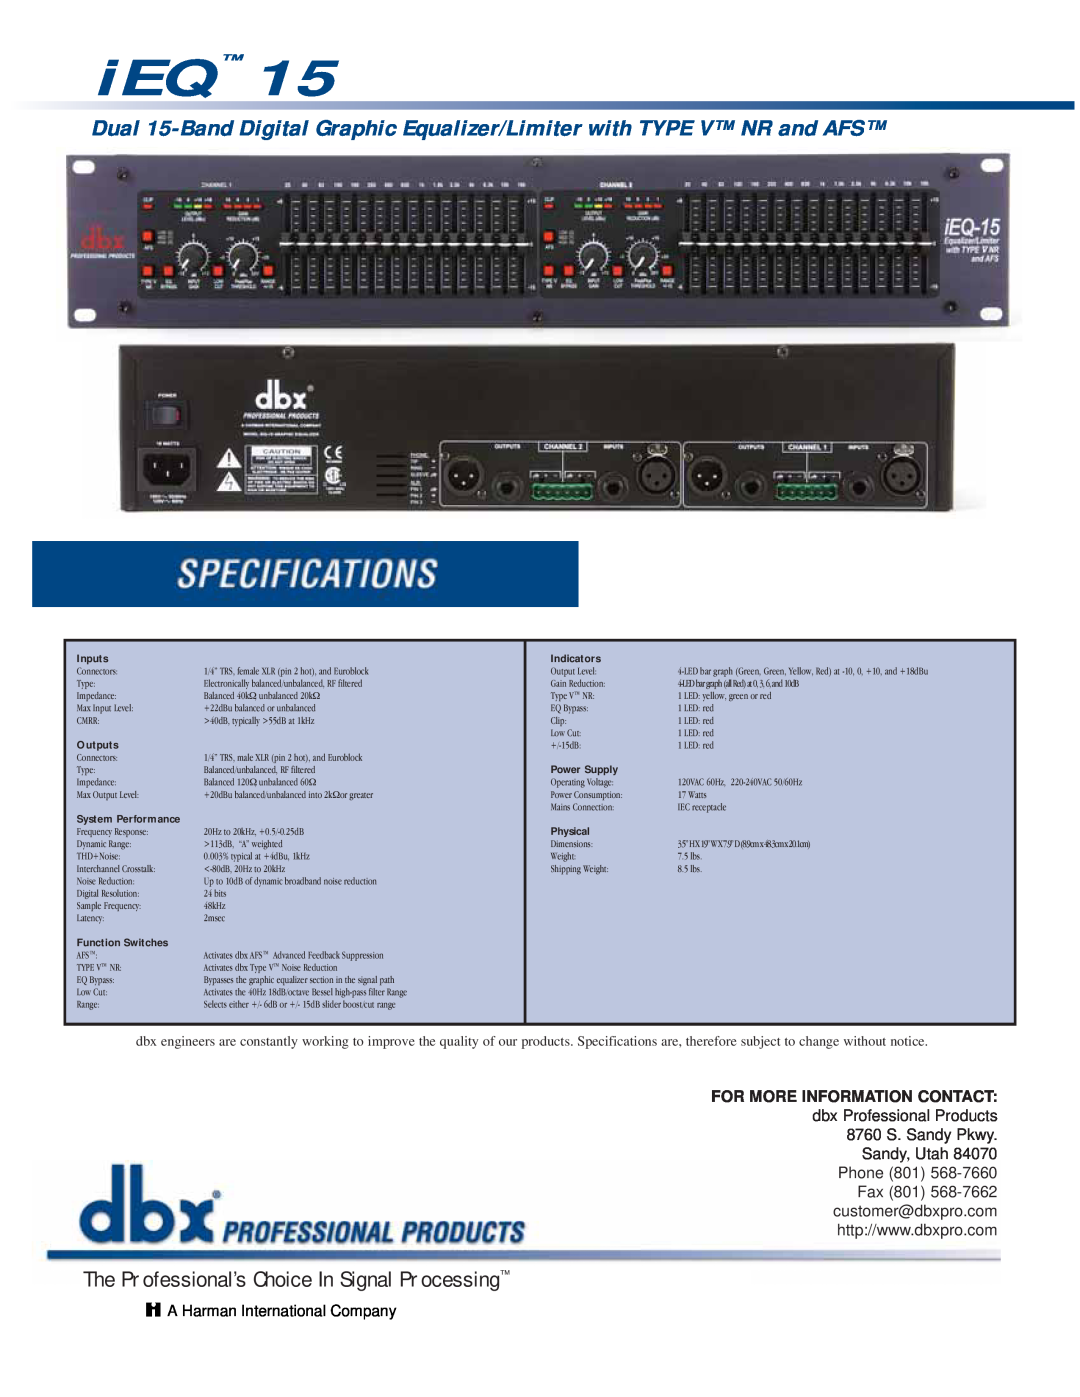 dbx Pro iEQ-15 The Professional’s Choice In Signal Processing, A Harman International Company, Inputs, Indicators, Outputs 